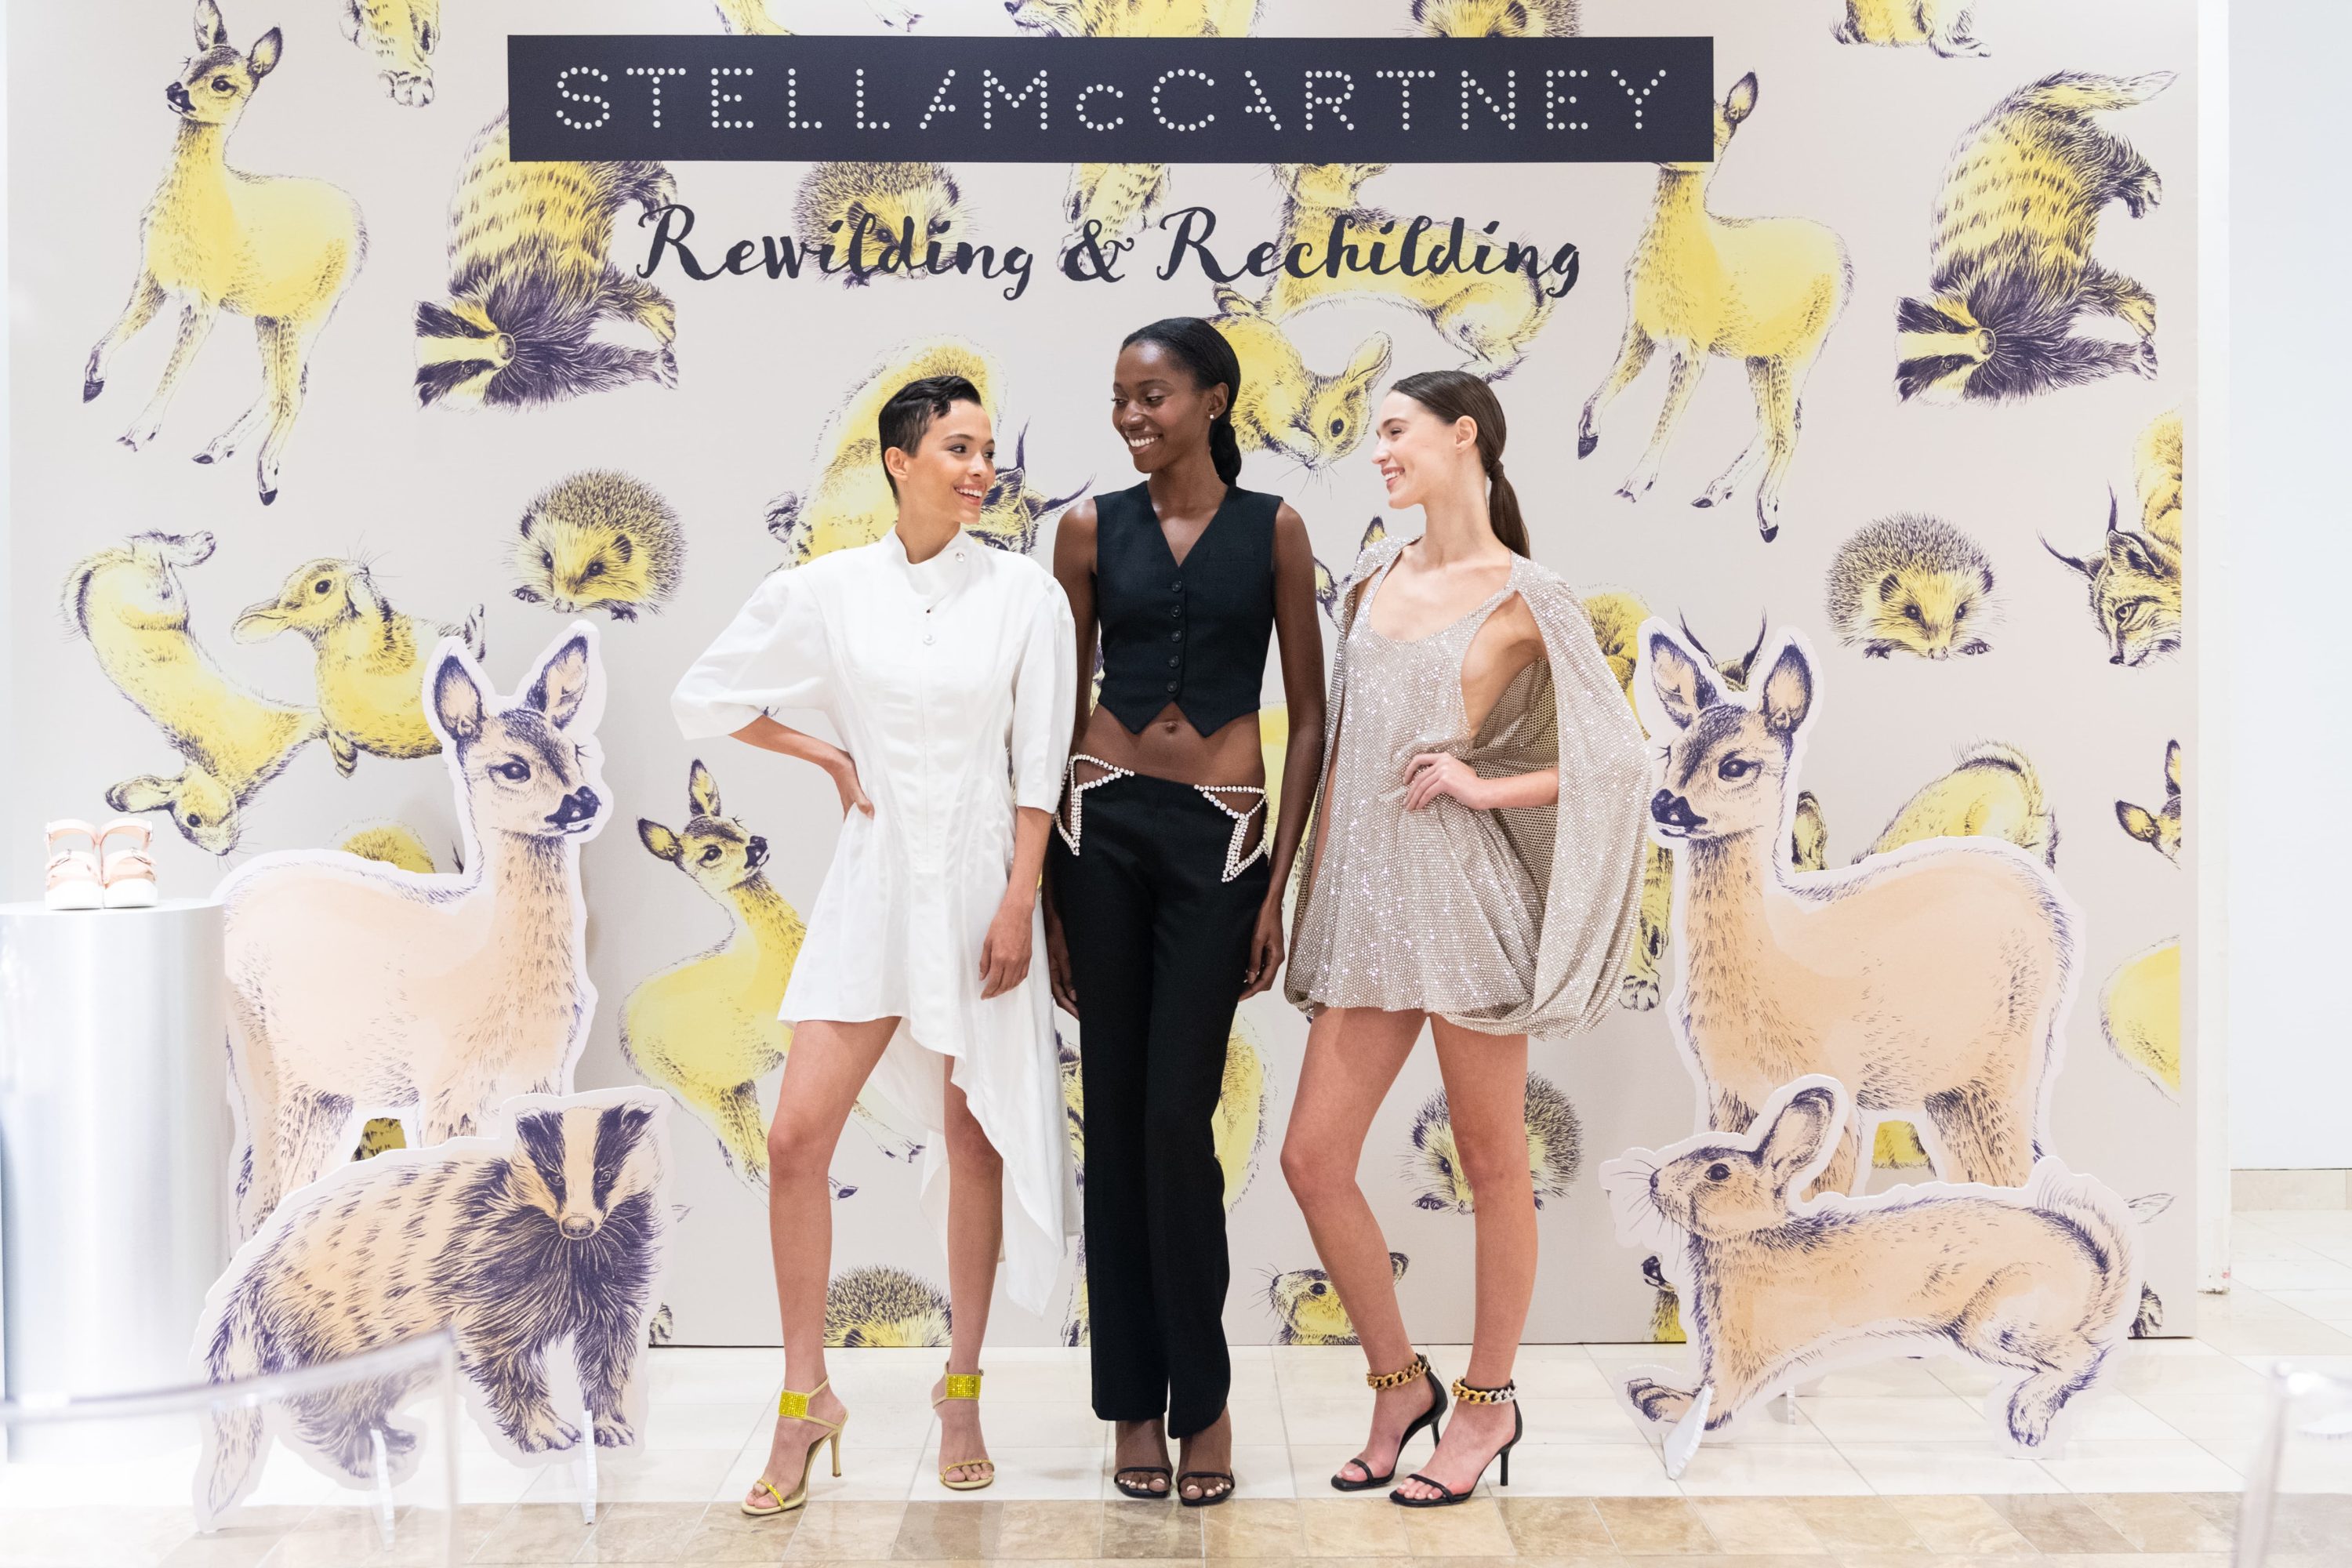 Stella McCartney Teams With Neiman Marcus for Holiday Capsule